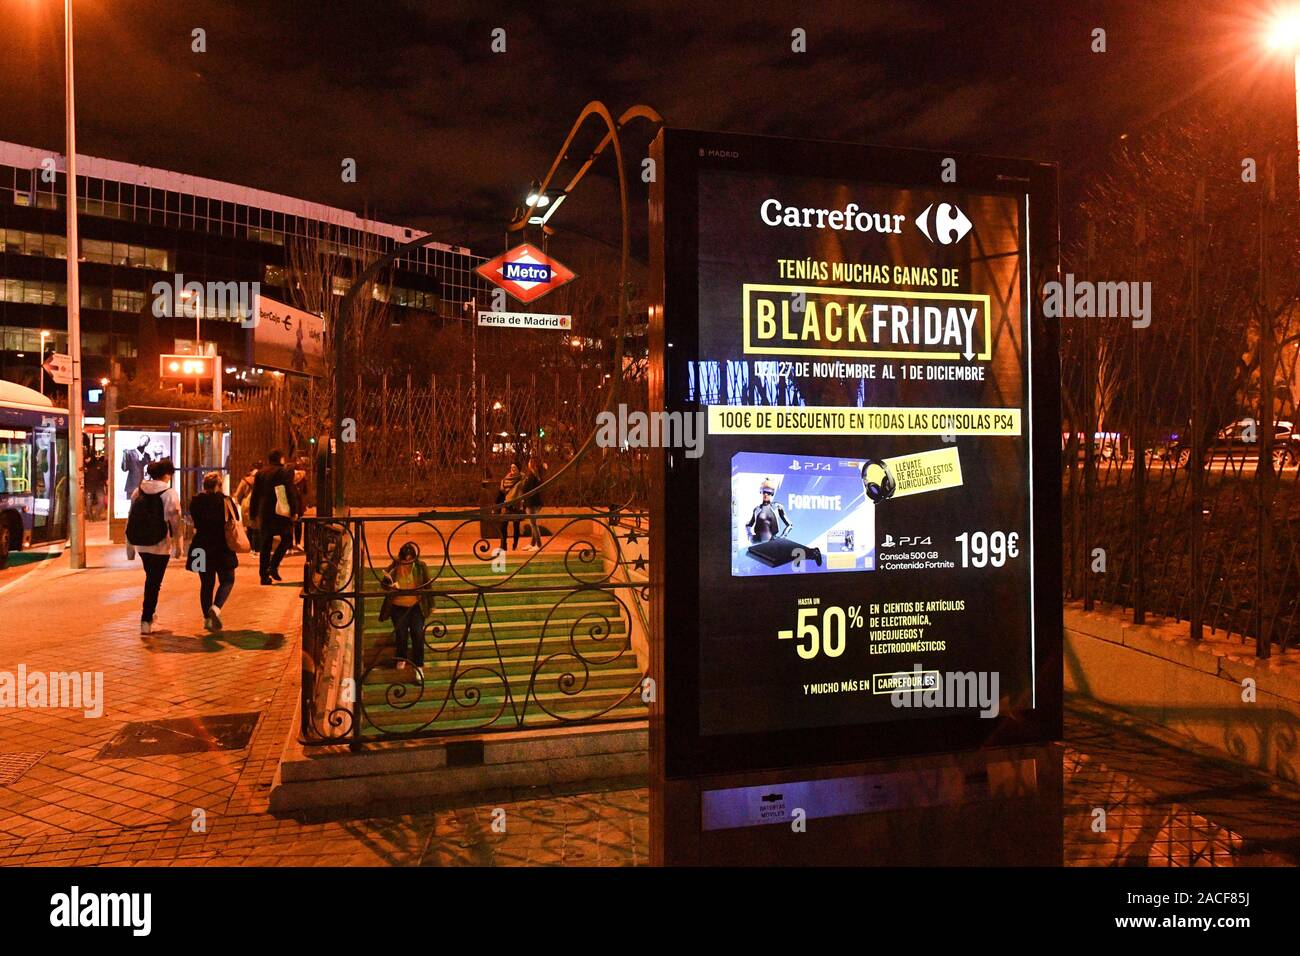 *** STRICTLY NO SALES TO FRENCH MEDIA OR PUBLISHERS *** December 02, 2019 - Madrid, Spain: An advertisement for Black Friday in front of the metro Feria de Madrid, near the IFEMA exhibition hall that host the COP25 climate talks. Stock Photo